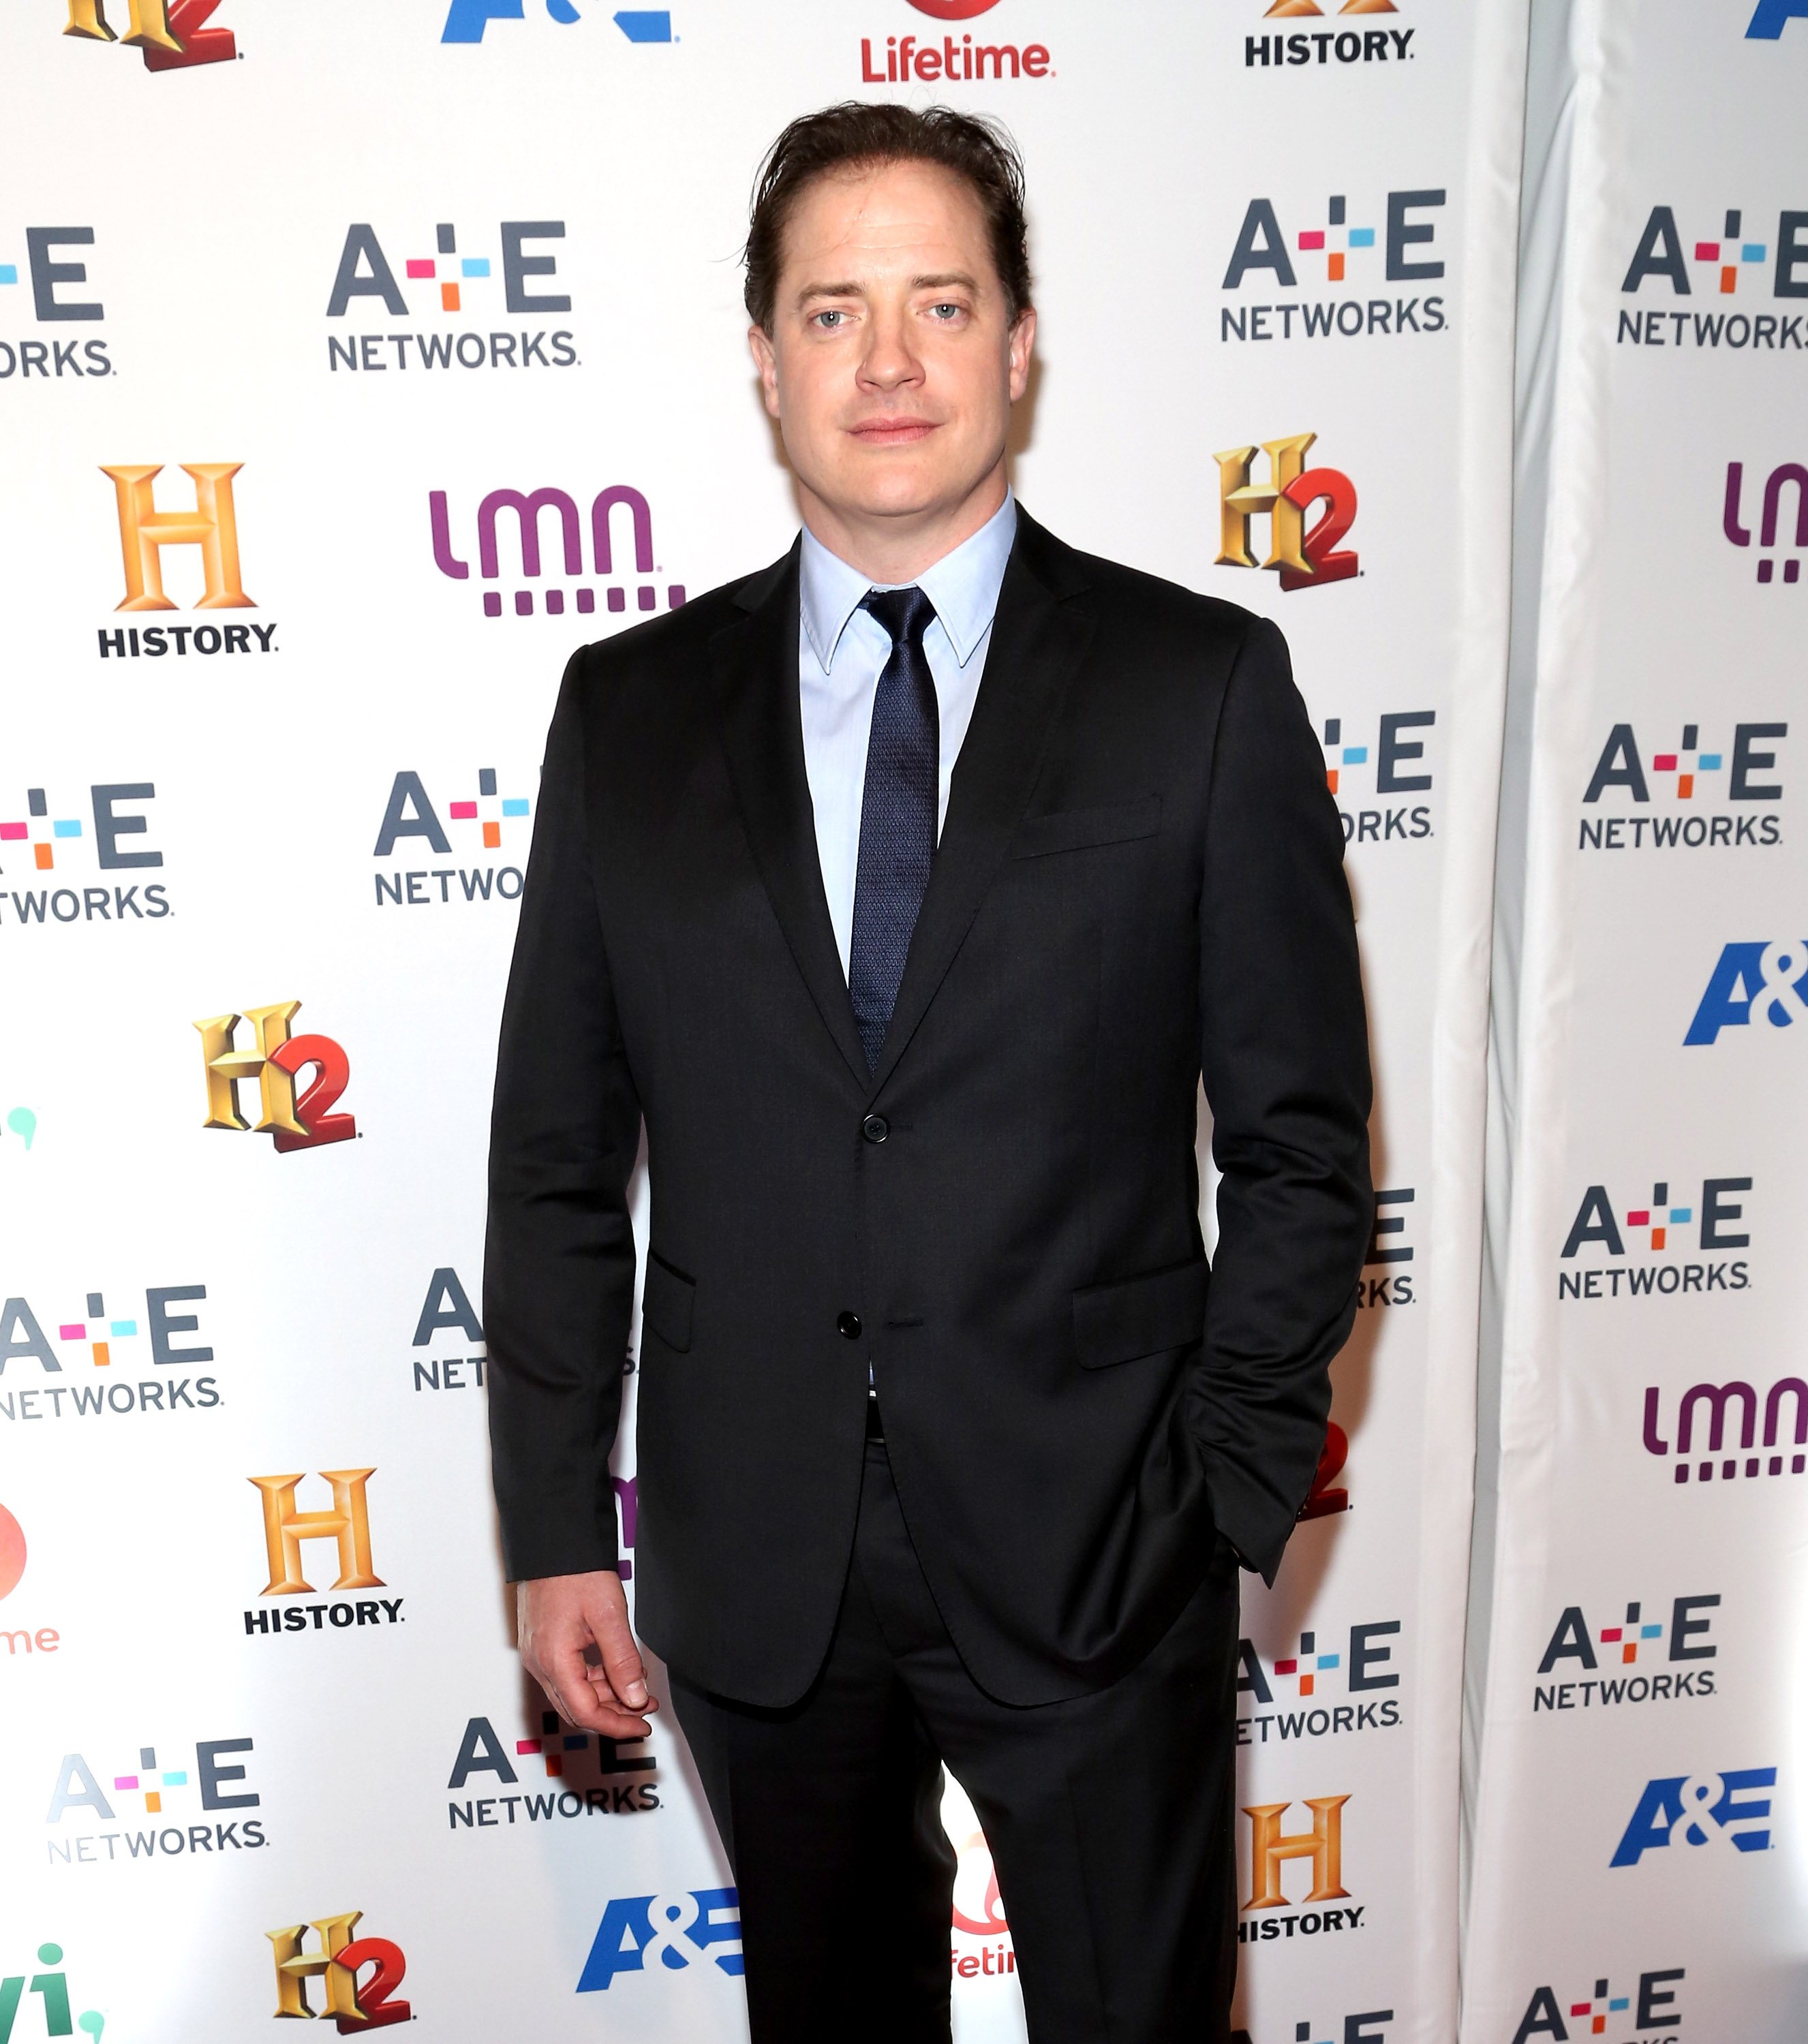 Brendan Fraser attends the 2014 A+E Networks Upfront at Park Avenue Armory on May 8, 2014 | Photo: Getty Images